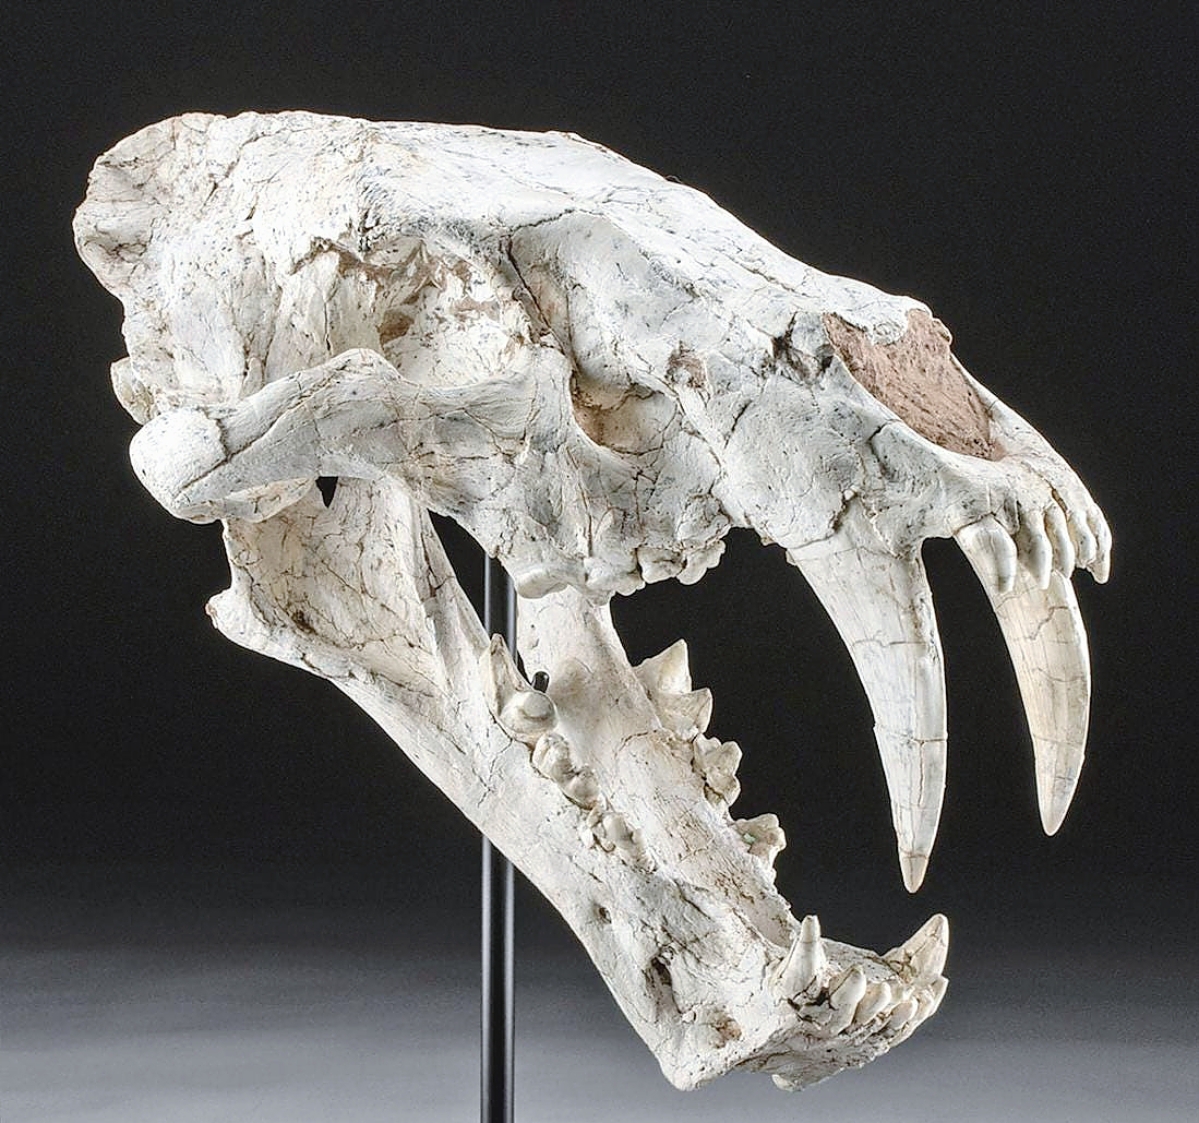 The auction house noted that this Sabertooth Machairodus Cat skull, at 14 inches long, was one of the largest ever offered at auction. The skull dated to the late Miocene Kalmakpai, approximately 15 to two million years ago. It brought a solid $37,750.